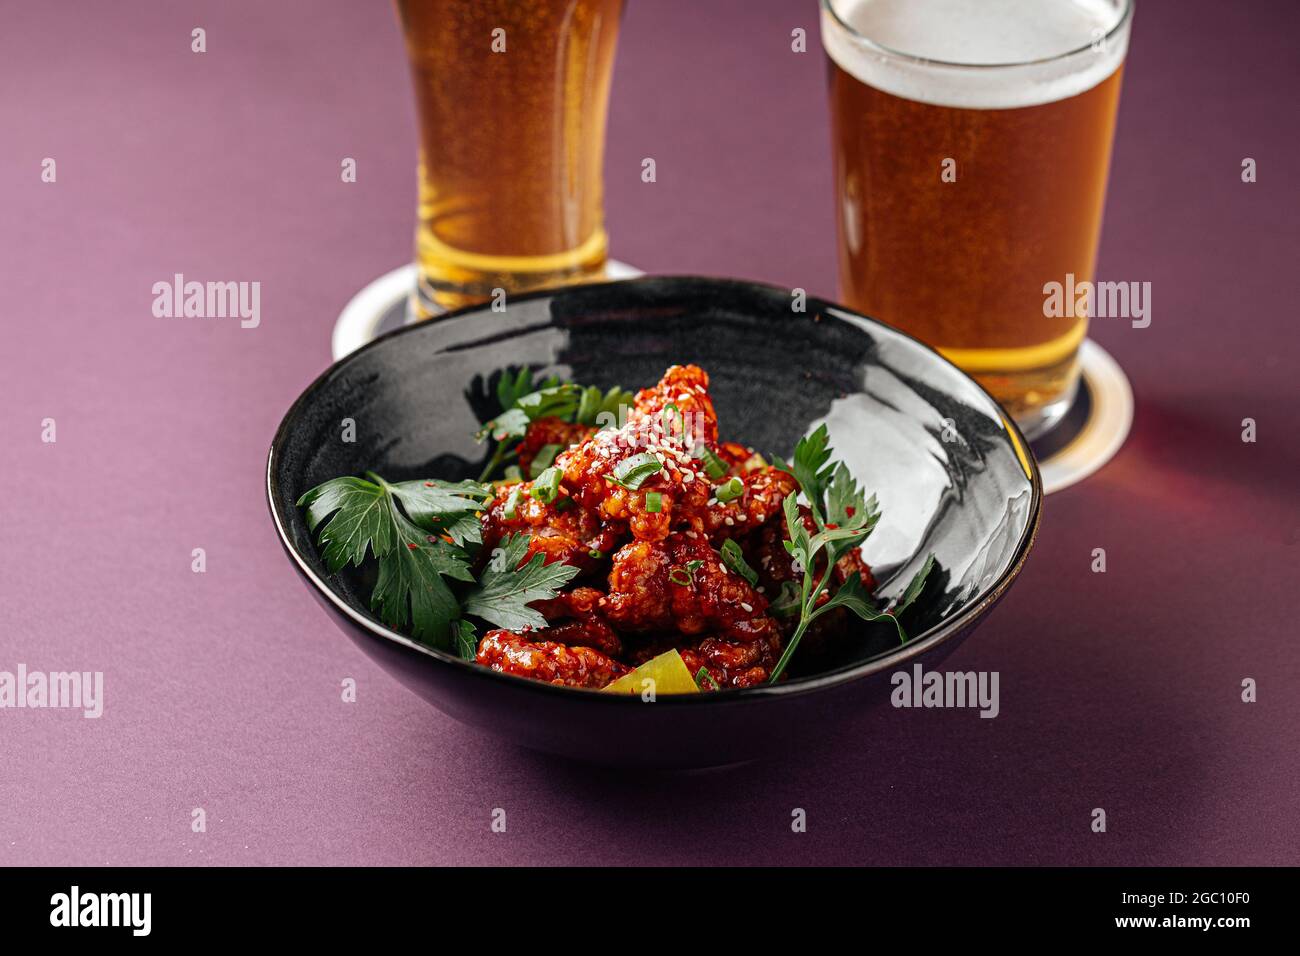 Japanese karaage chicken with beer on a purple Stock Photo